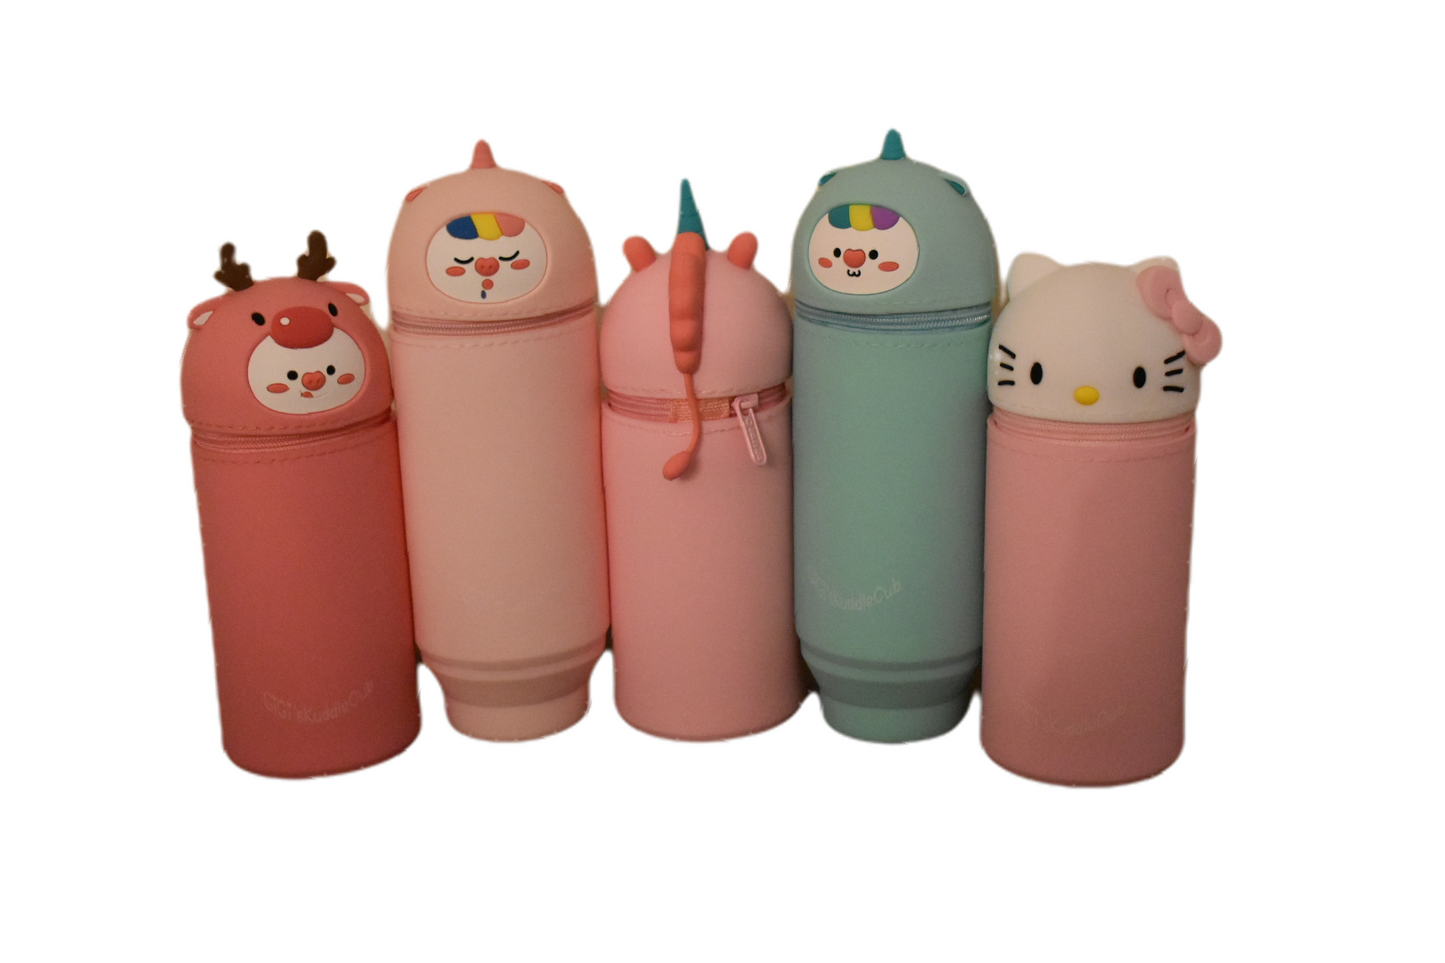 Silicone Cute Kawaii cylinder pen/pencil case holder ( with Box)